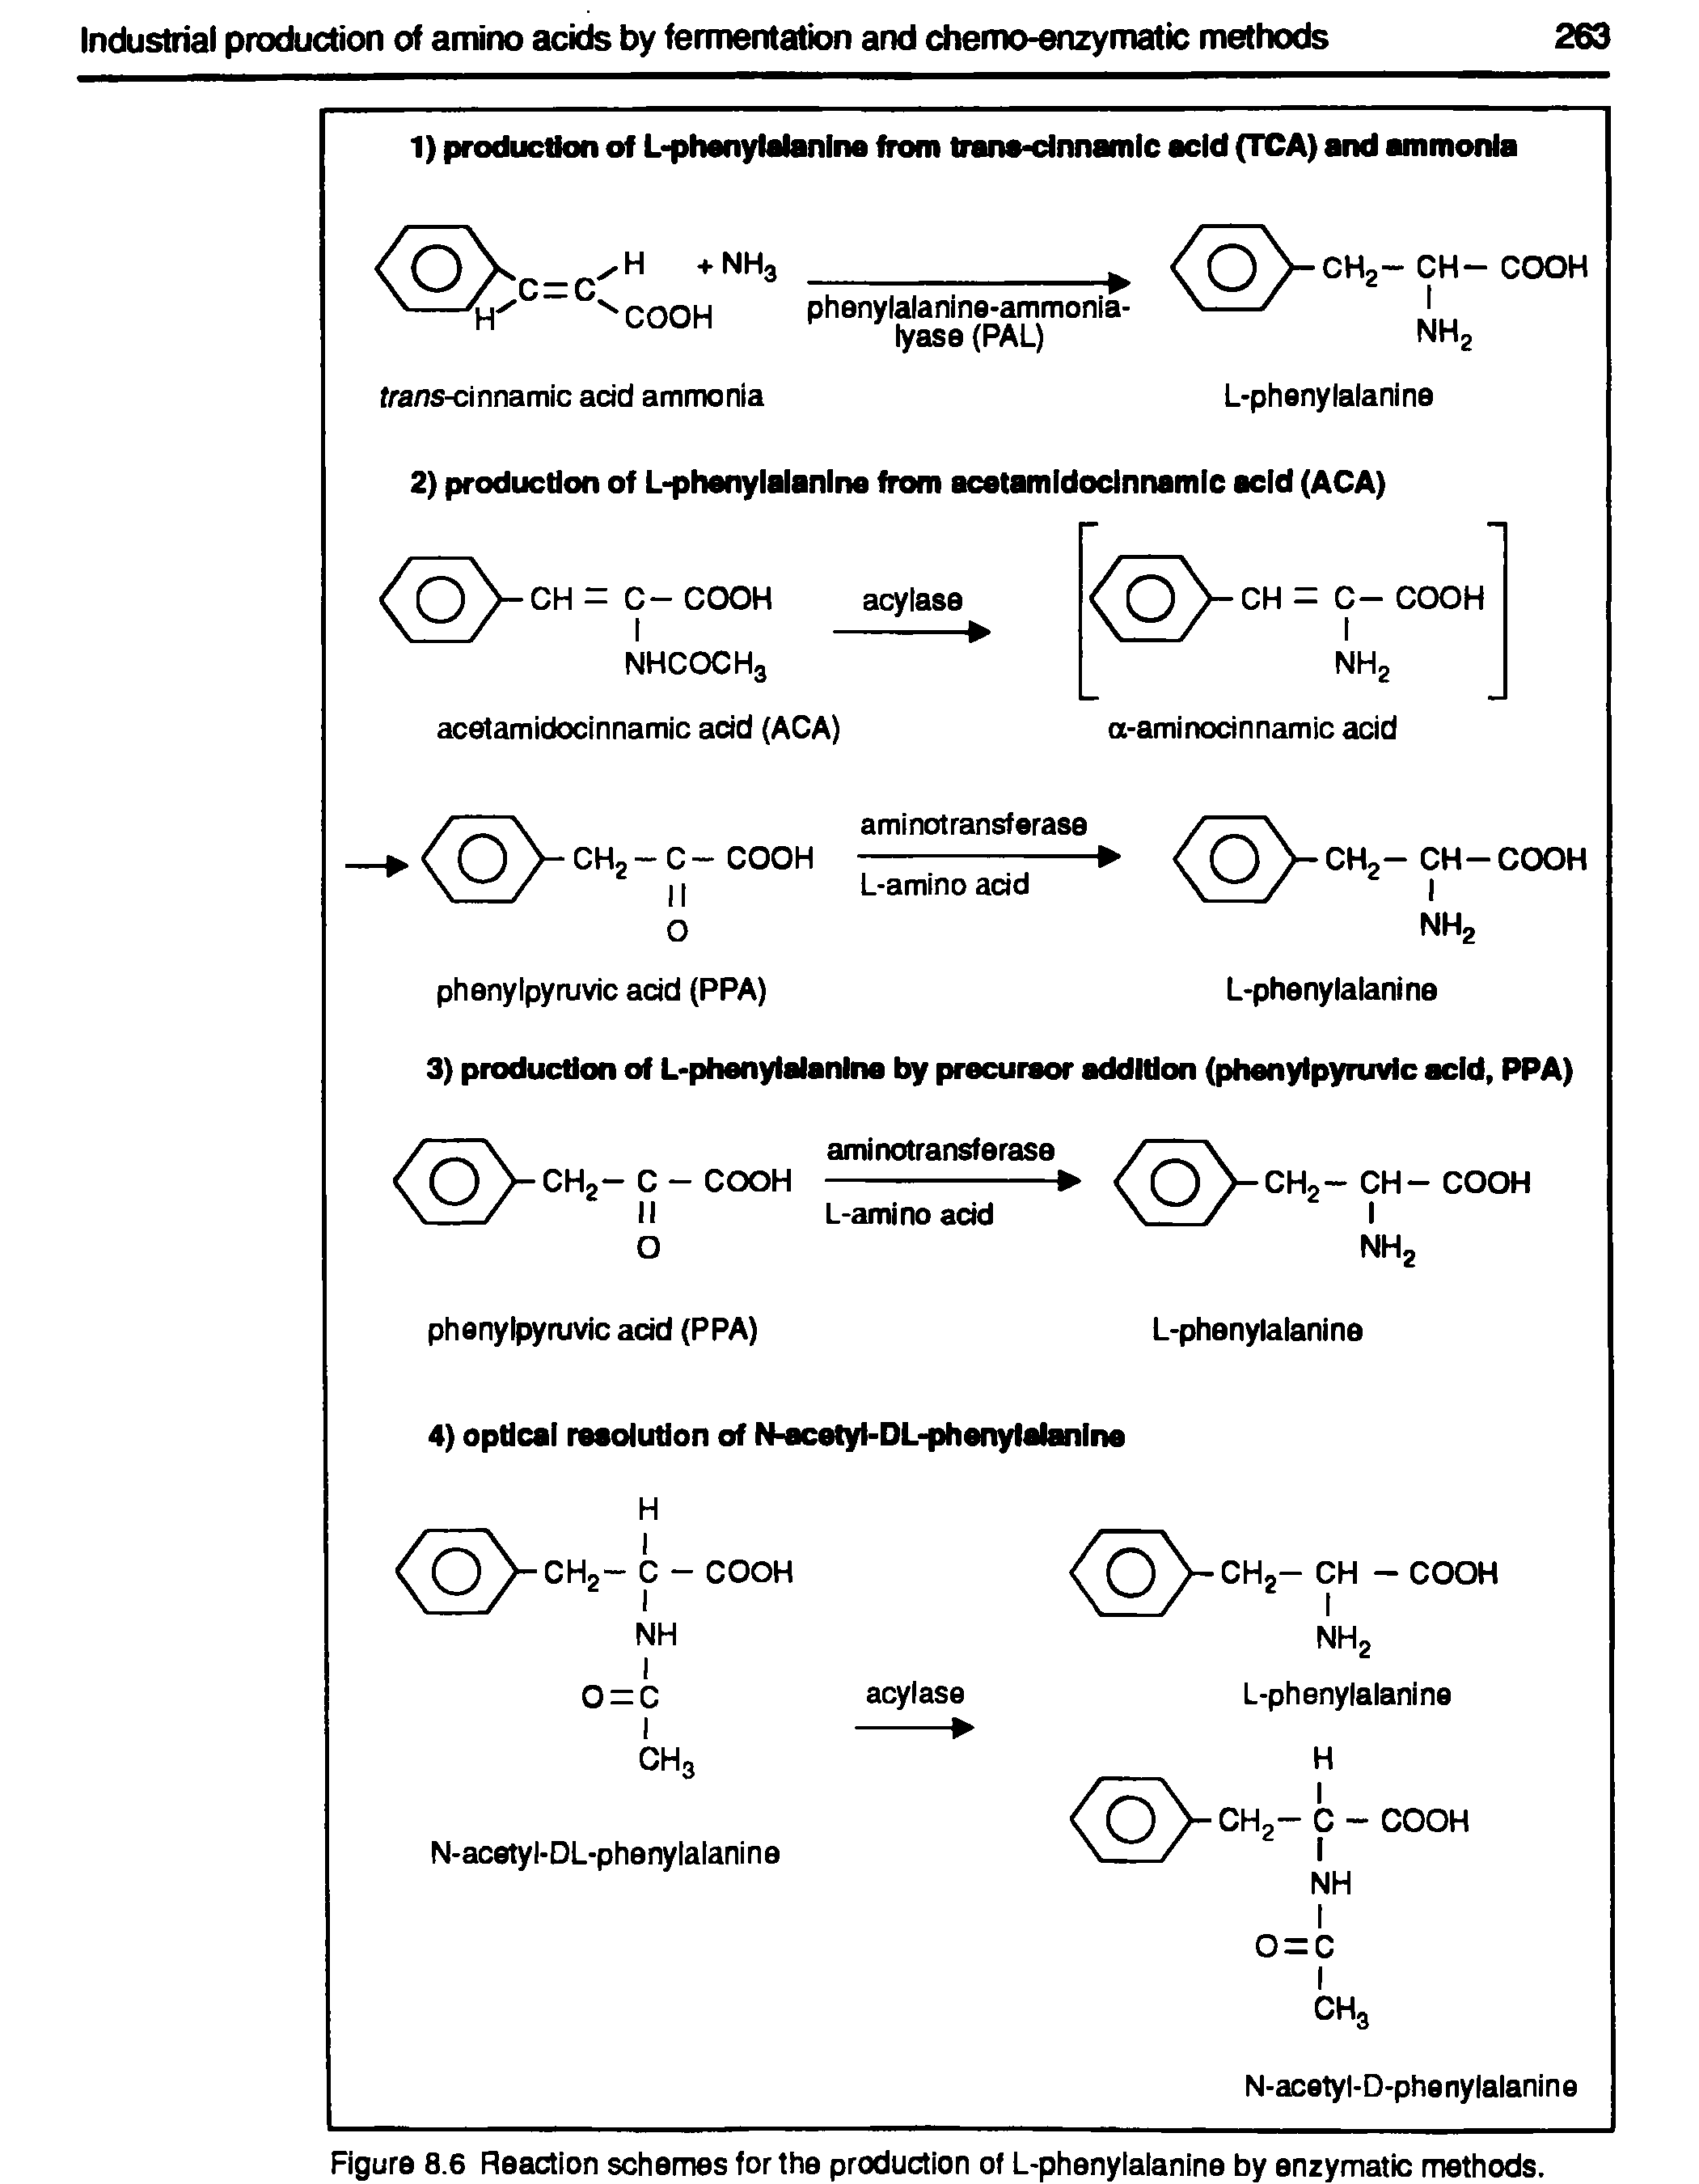 Figure 8.6 Reaction schemes for the production of L-phenylalanine by enzymatic methods.